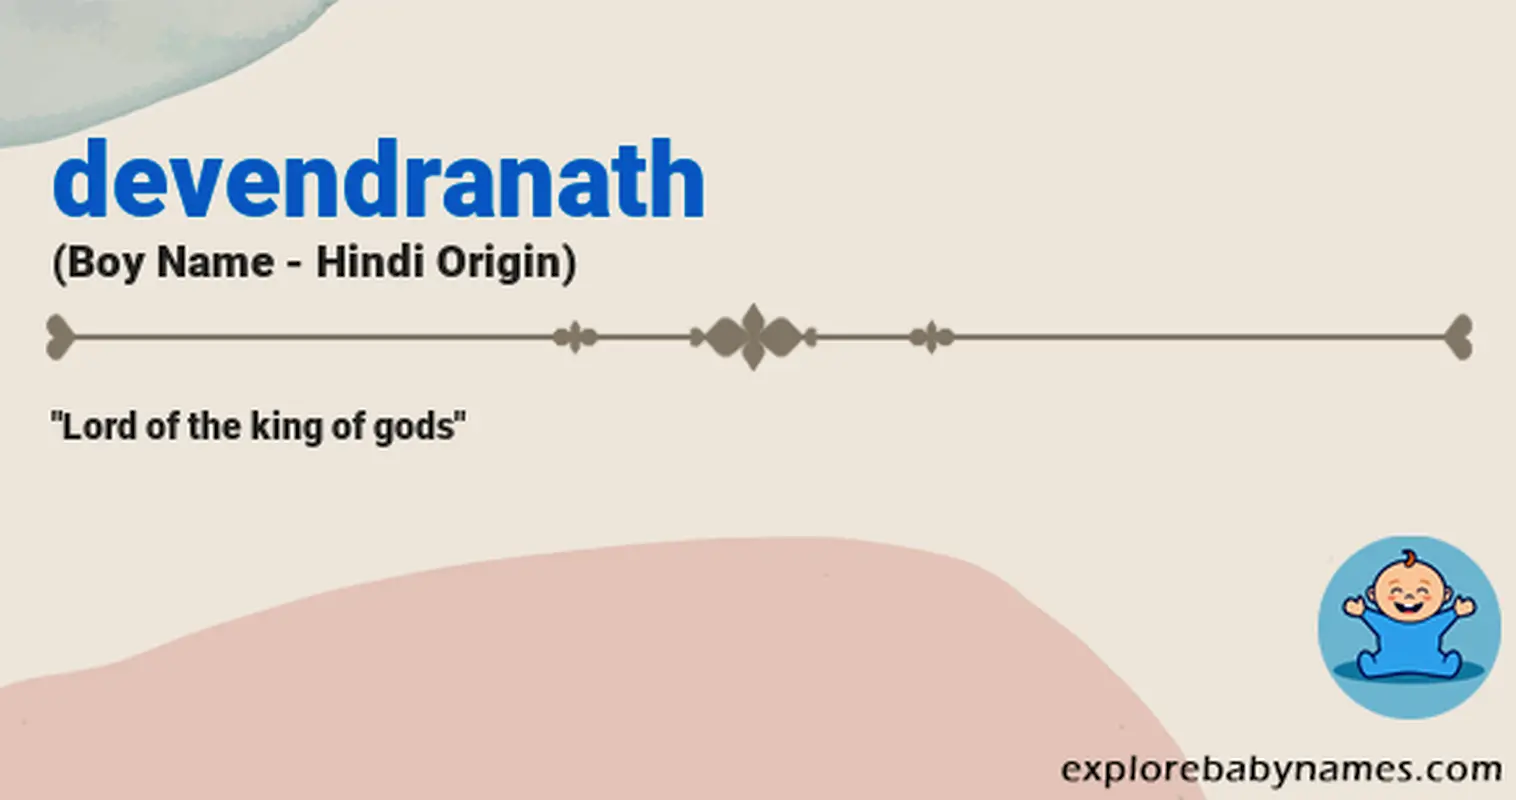 Meaning of Devendranath